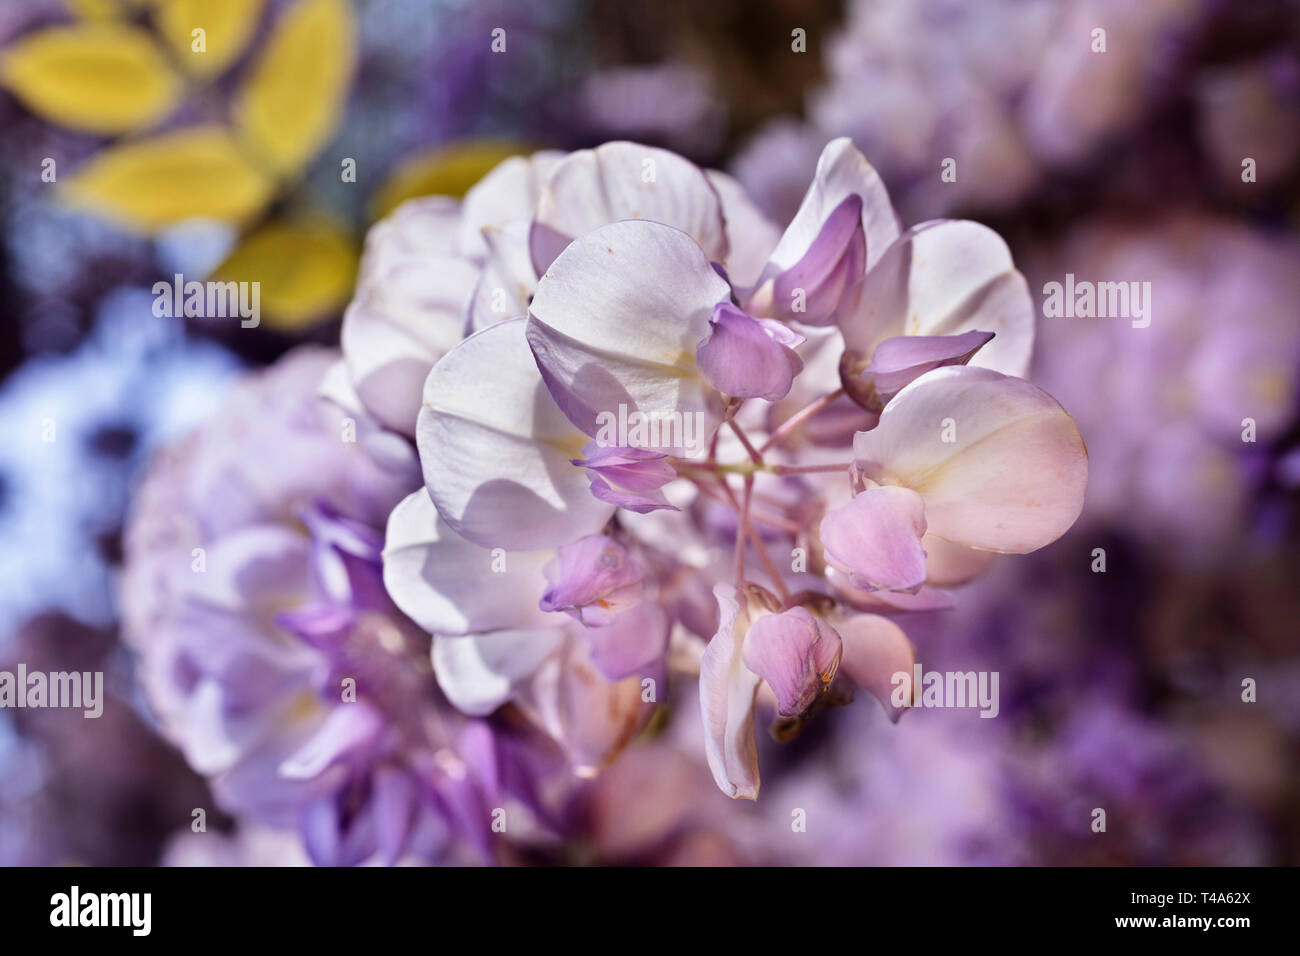 Flowers of wisteria  in springtime ,the petals are white and purple , the flowers are produced in pendulous racemos , in the background yellow leaves Stock Photo